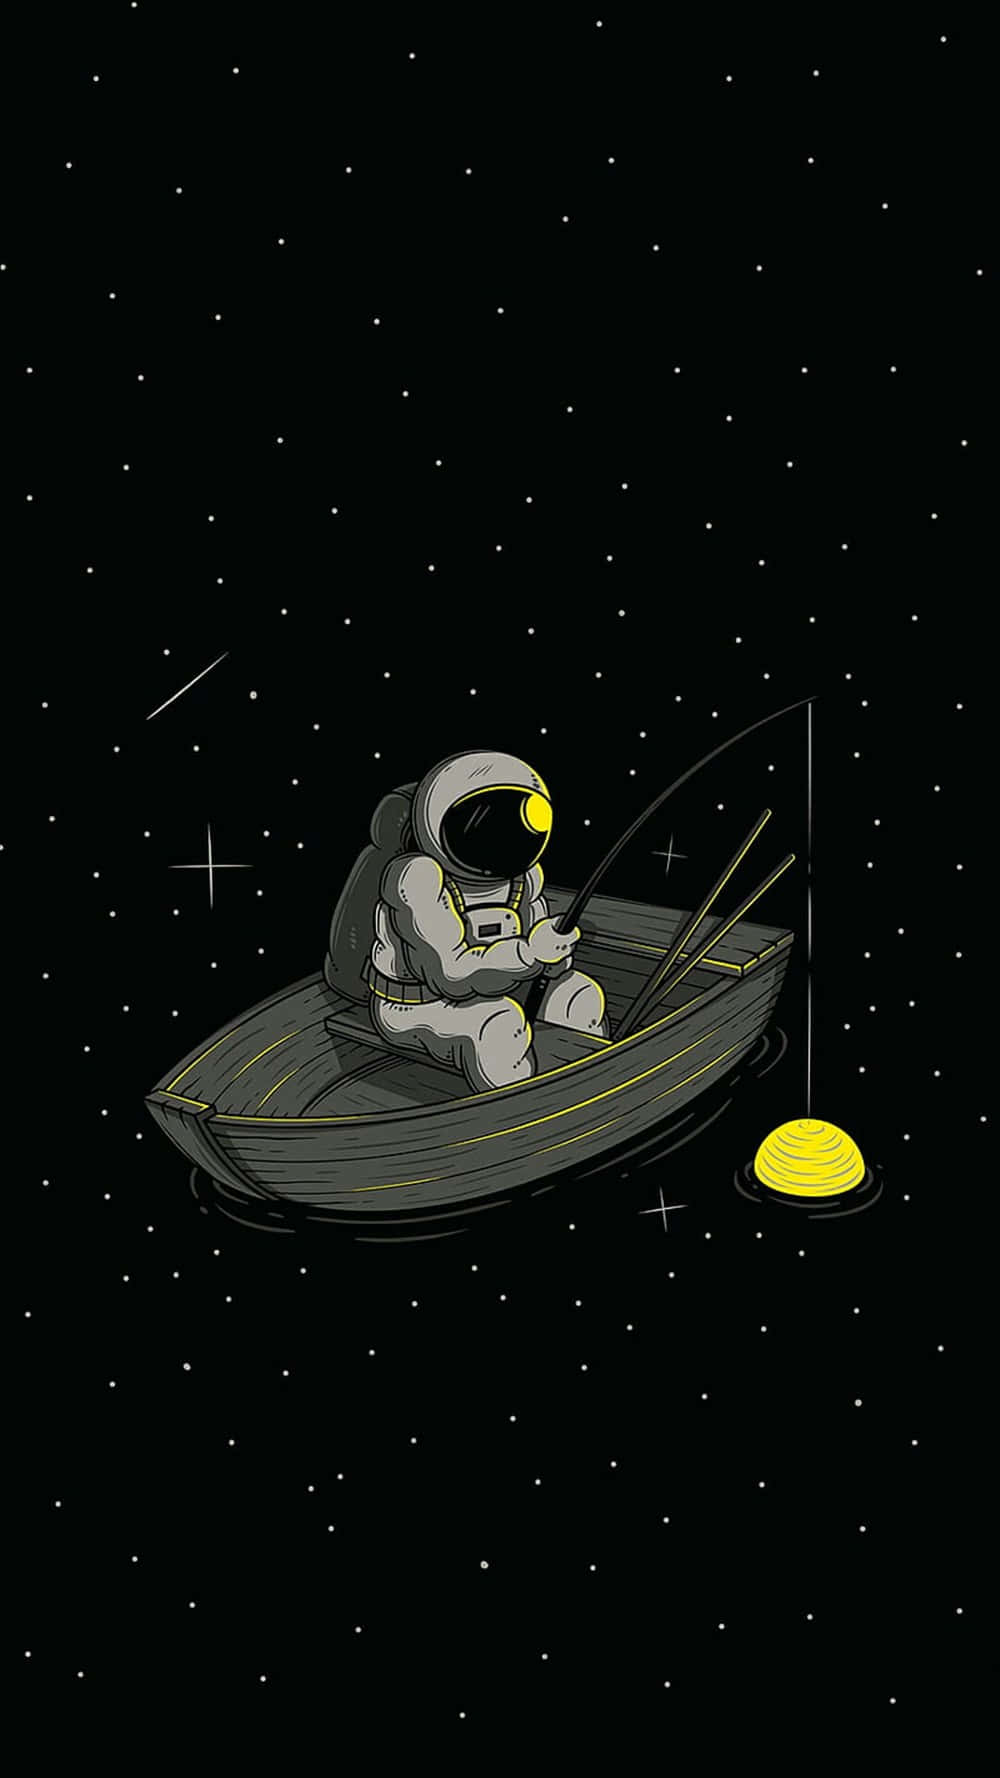 An Astronaut Is Fishing In A Boat Background